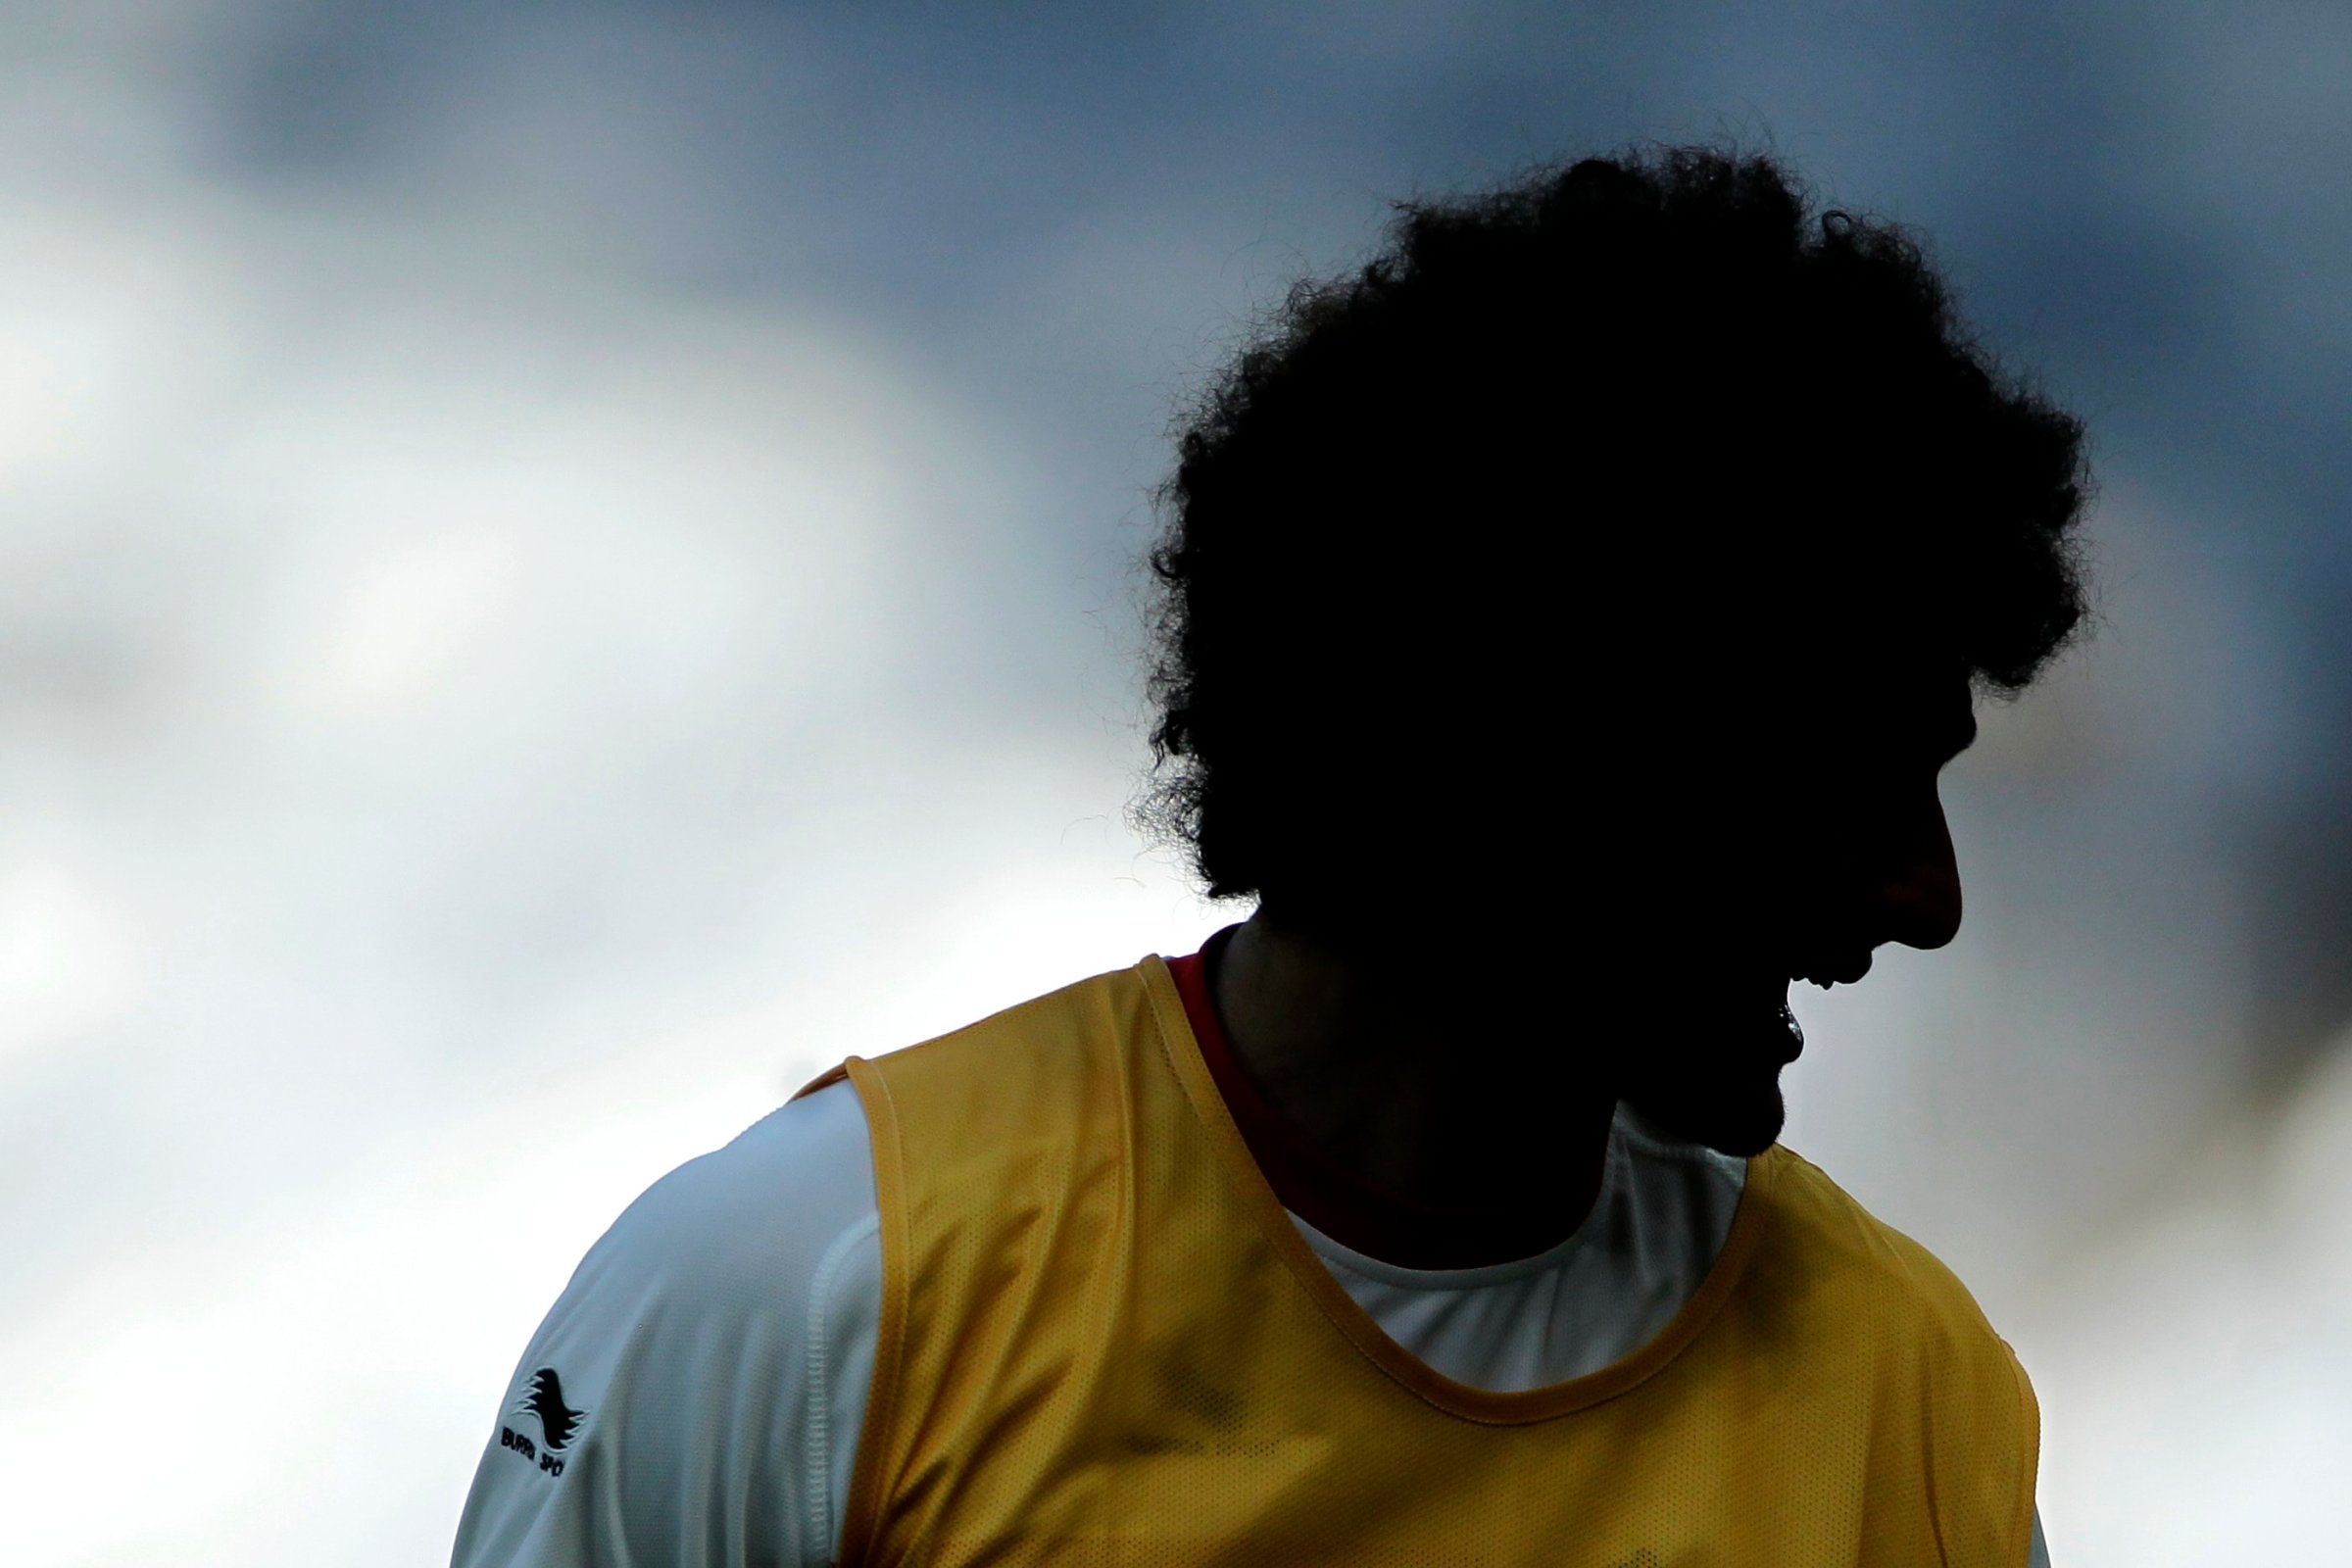 Belgiumís Marouane Fellaini laughs during a training session at the Mineirao Stadium in Belo Horizonte, Brazil on June 16, 2014.